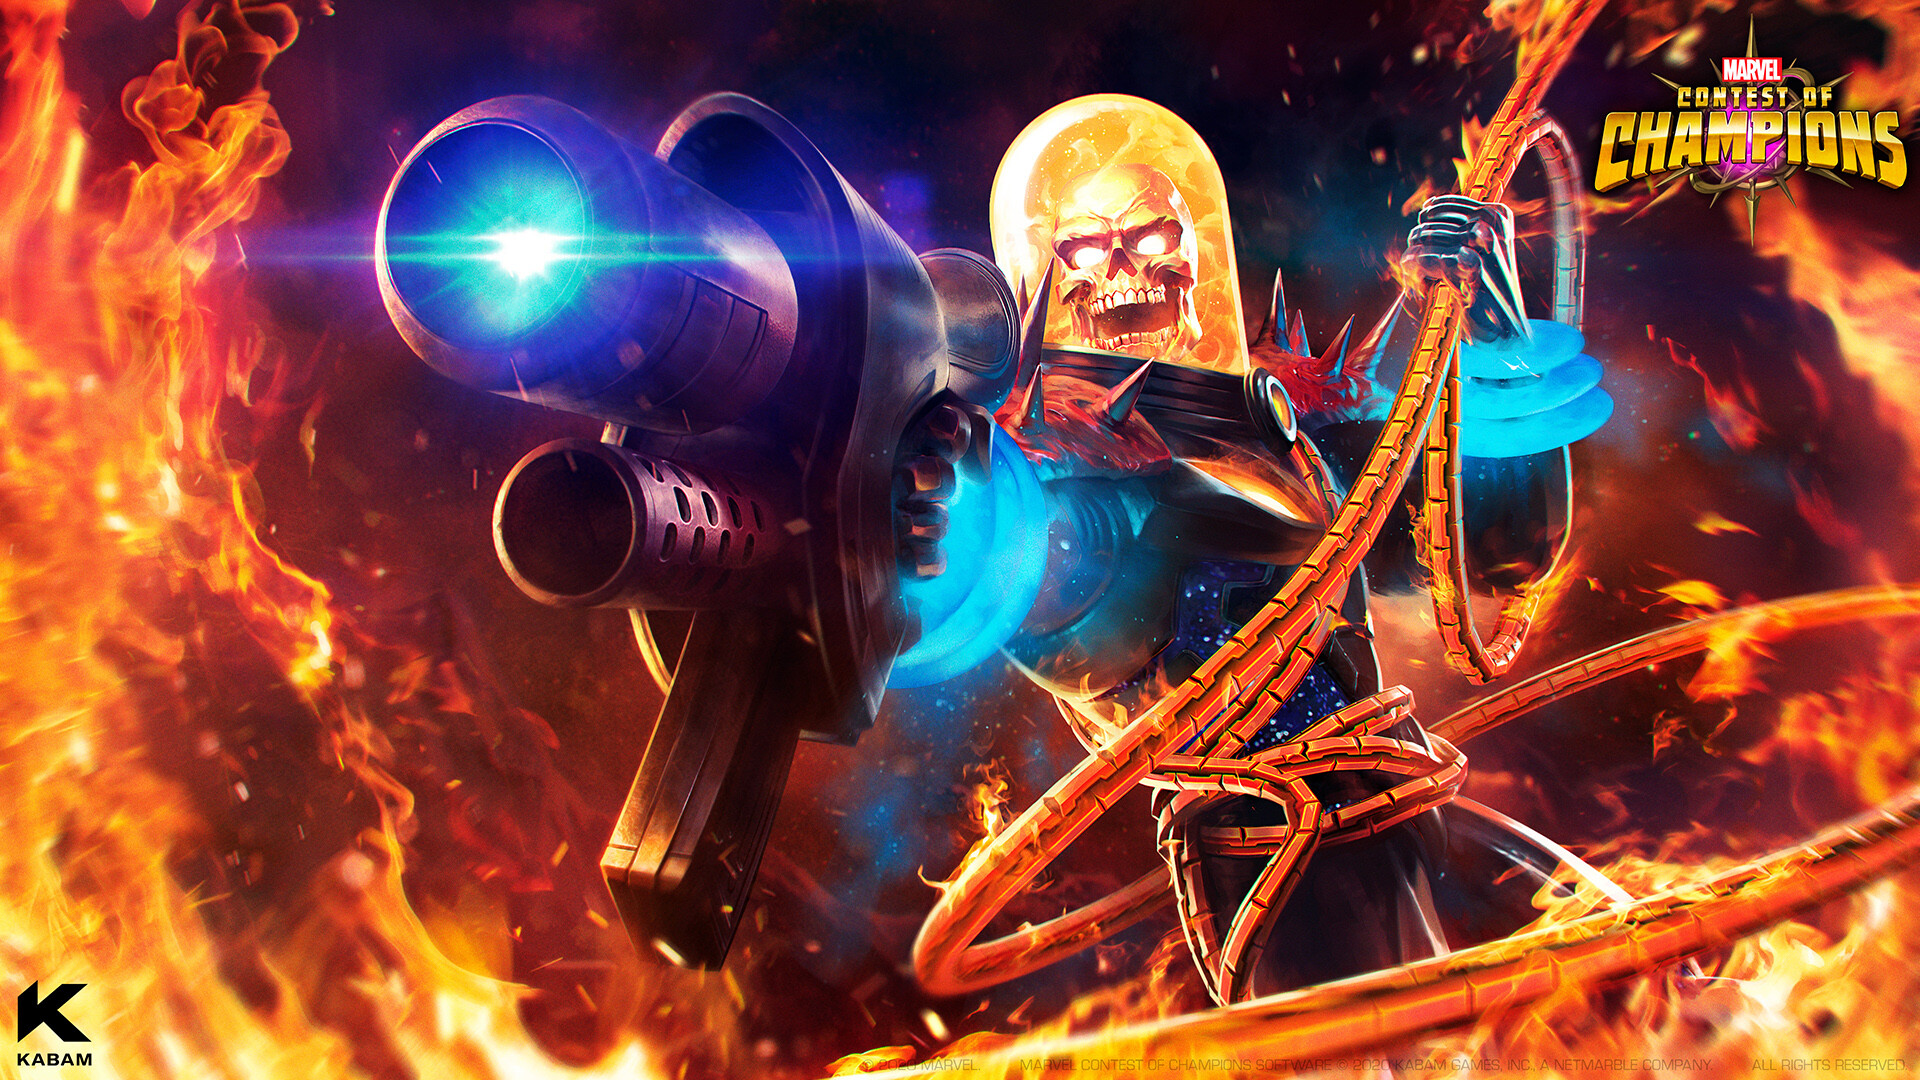 Marvel Contest of Champions  Dont worry this Ghost Rider wallpaper will  only burn the evil and corrupt  Facebook